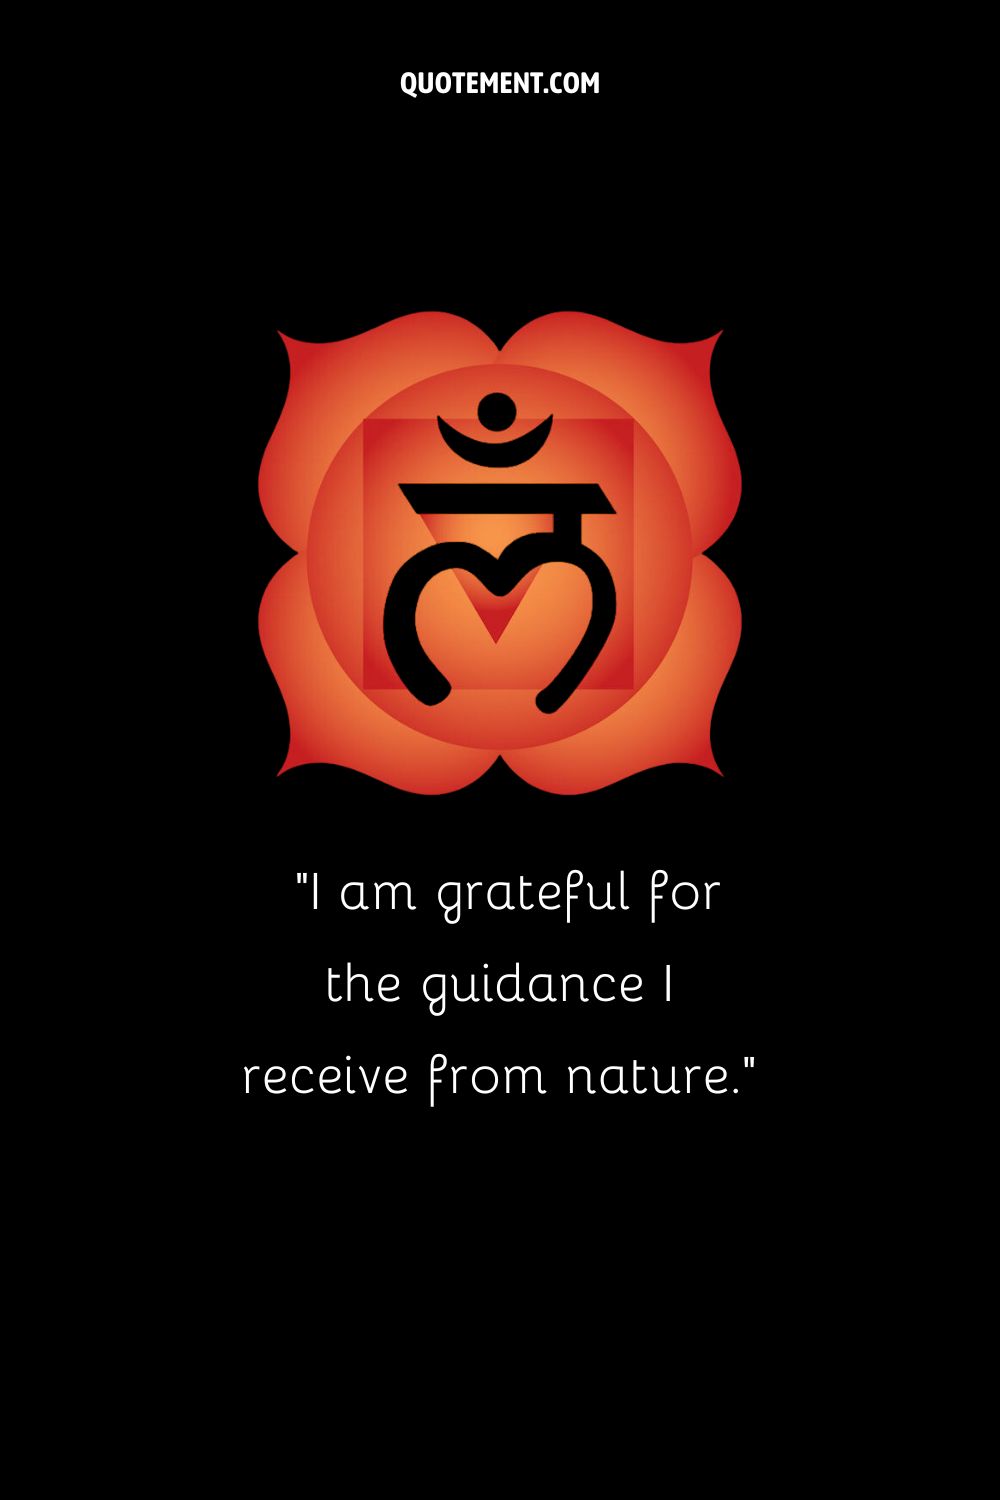 Illustration of the root chakra symbol representing an affirmation for reconnecting with the Earth
